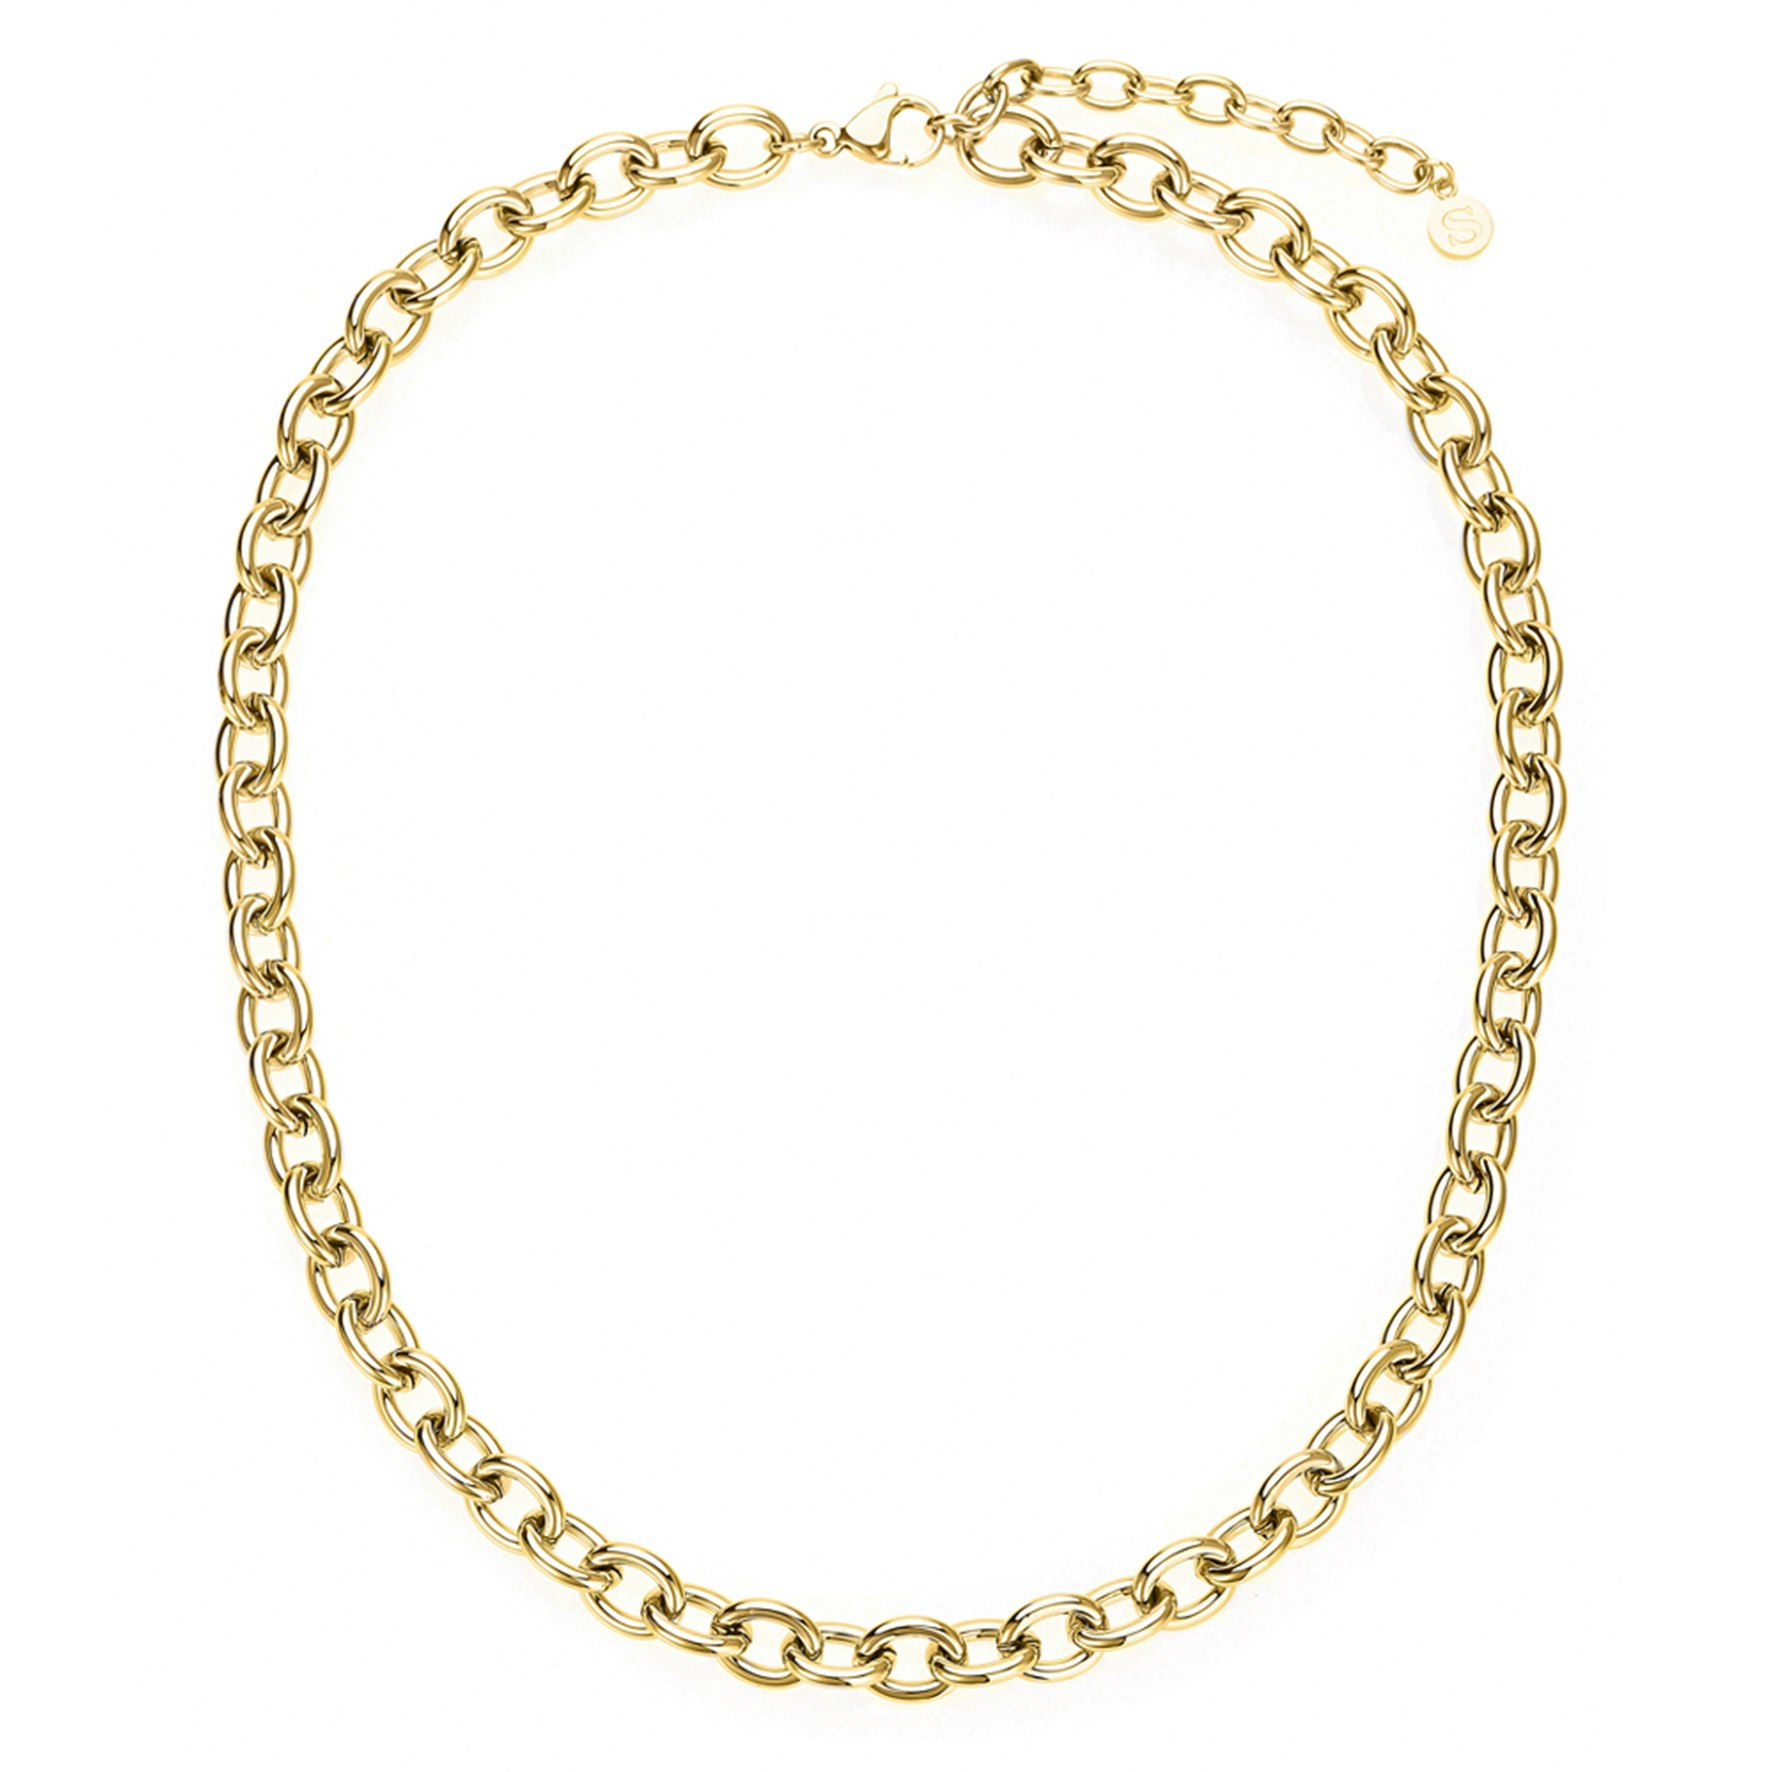 Clara Necklace from Sistie 2nd in Goldplated stainless steel